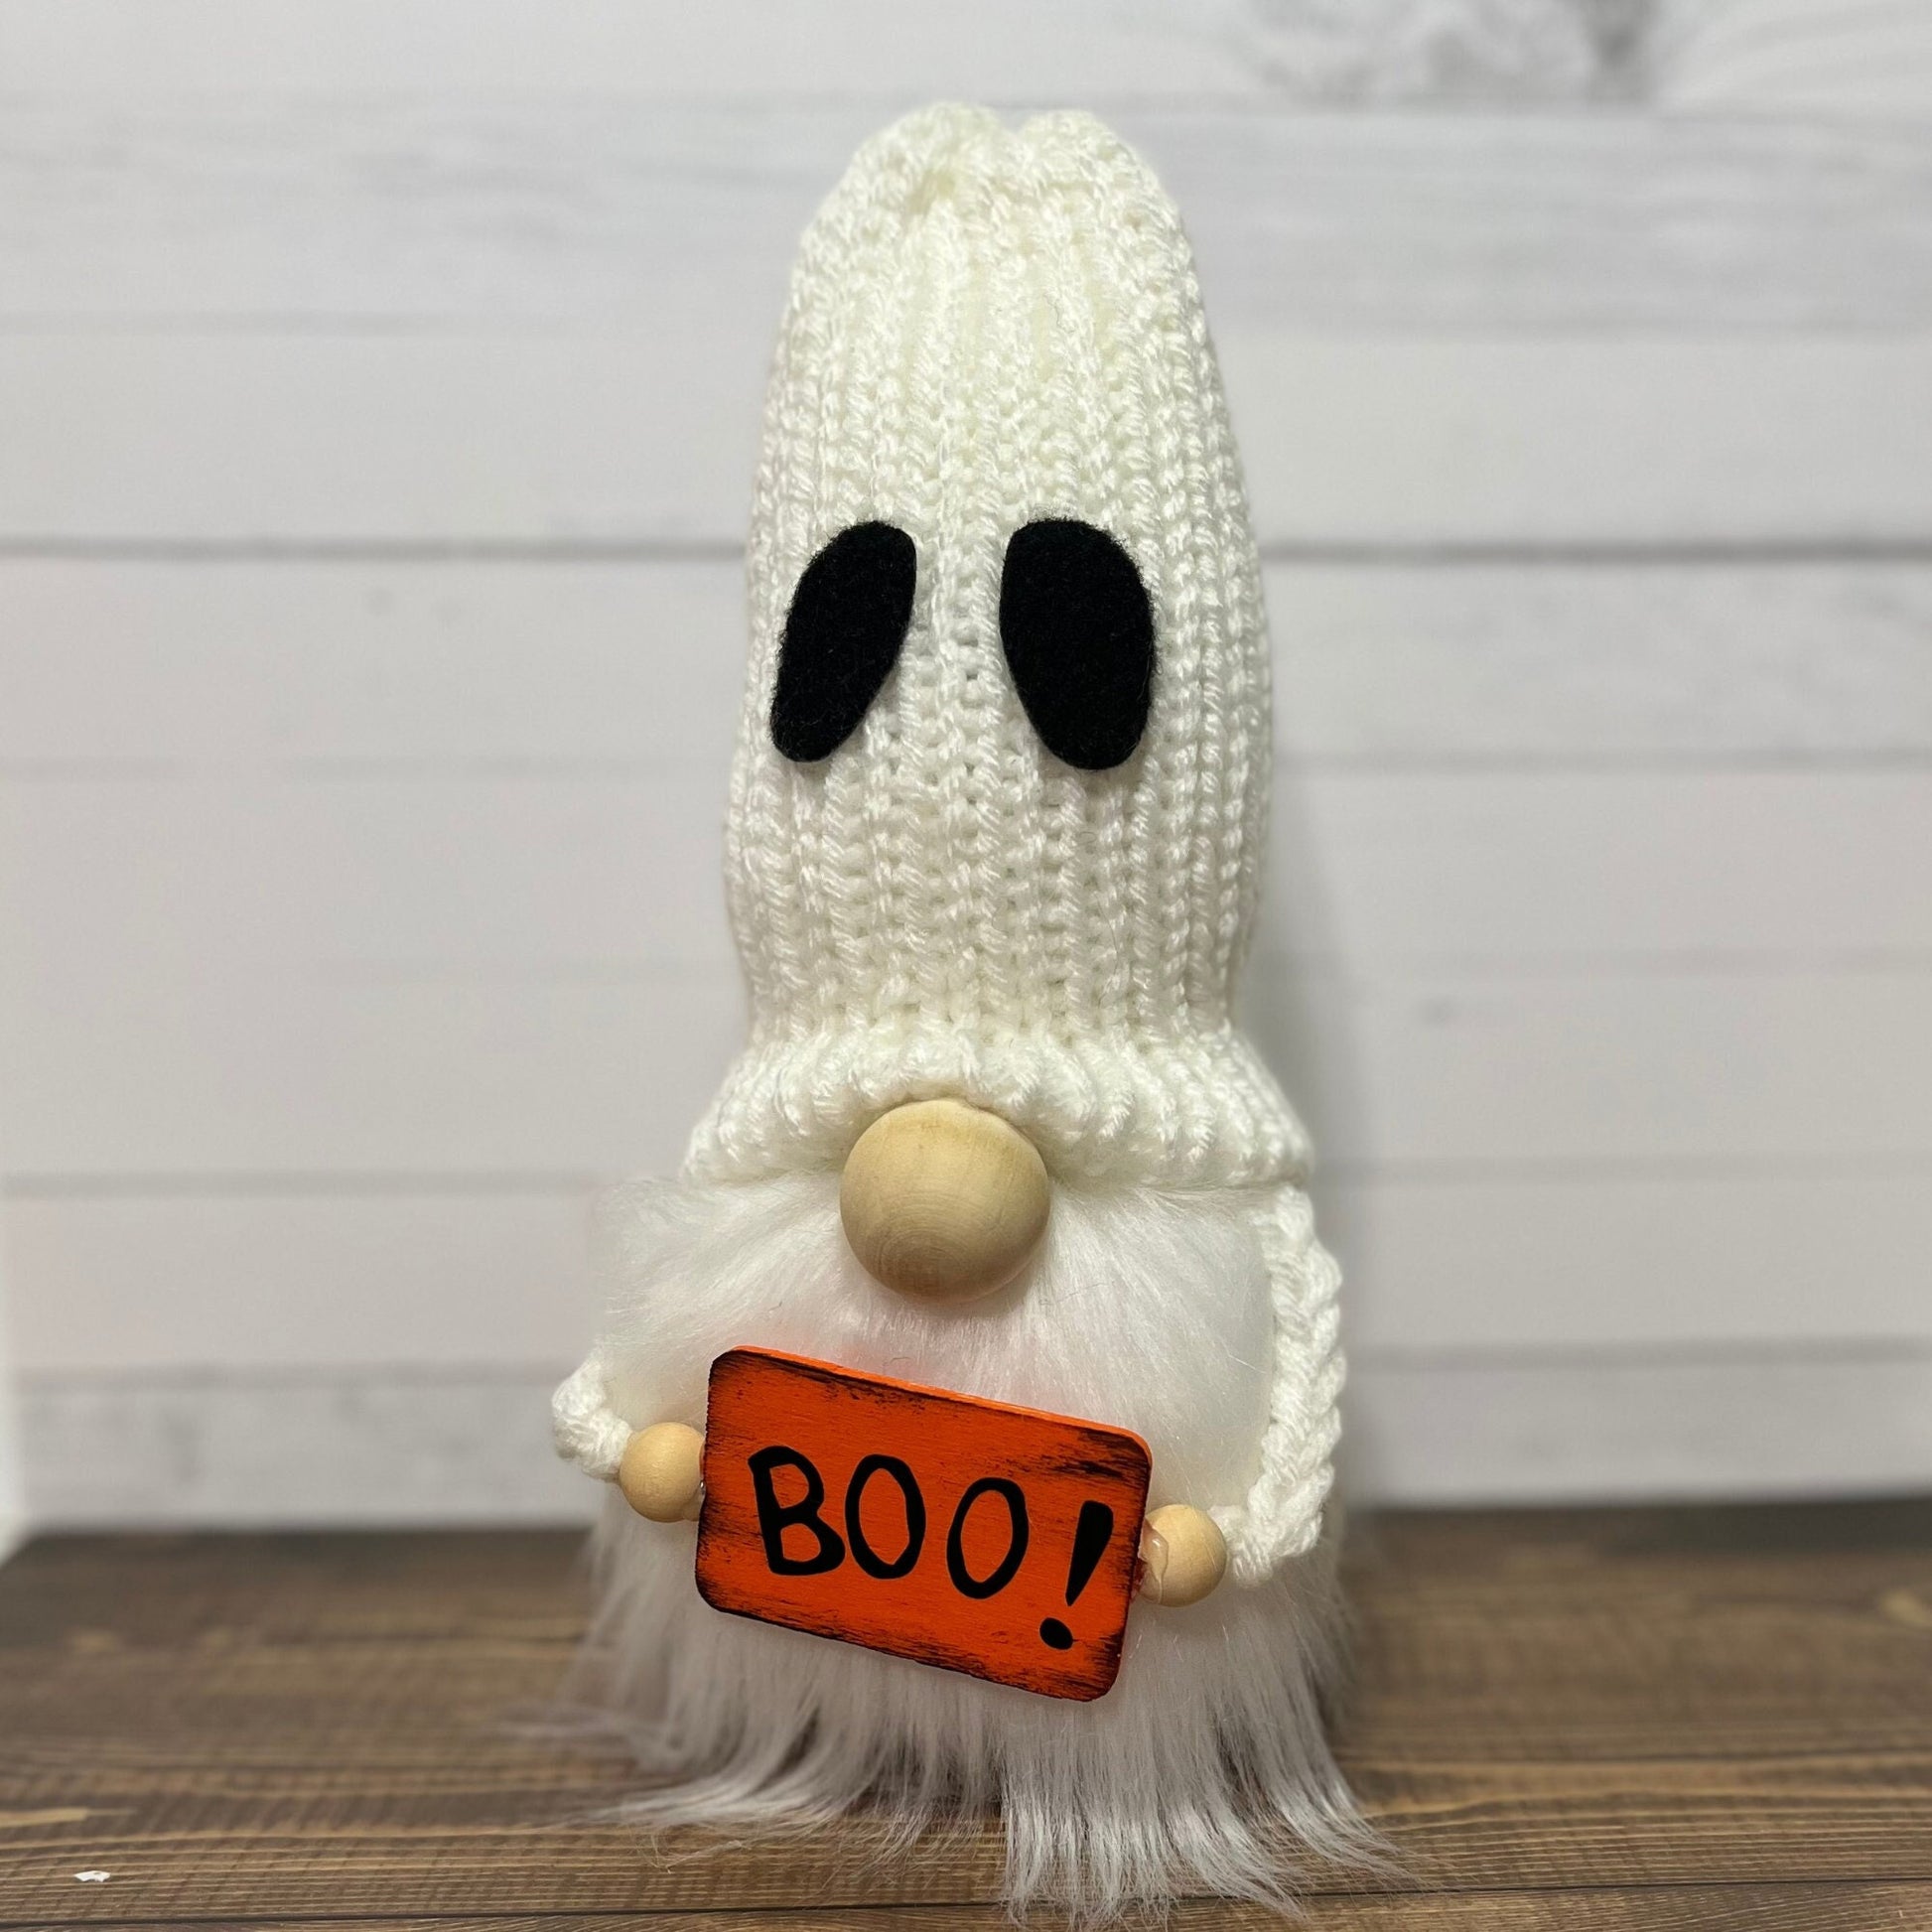 Boo Ghost Gnome / Spooky Season Tiered Tray Decor / Halloween Decorations